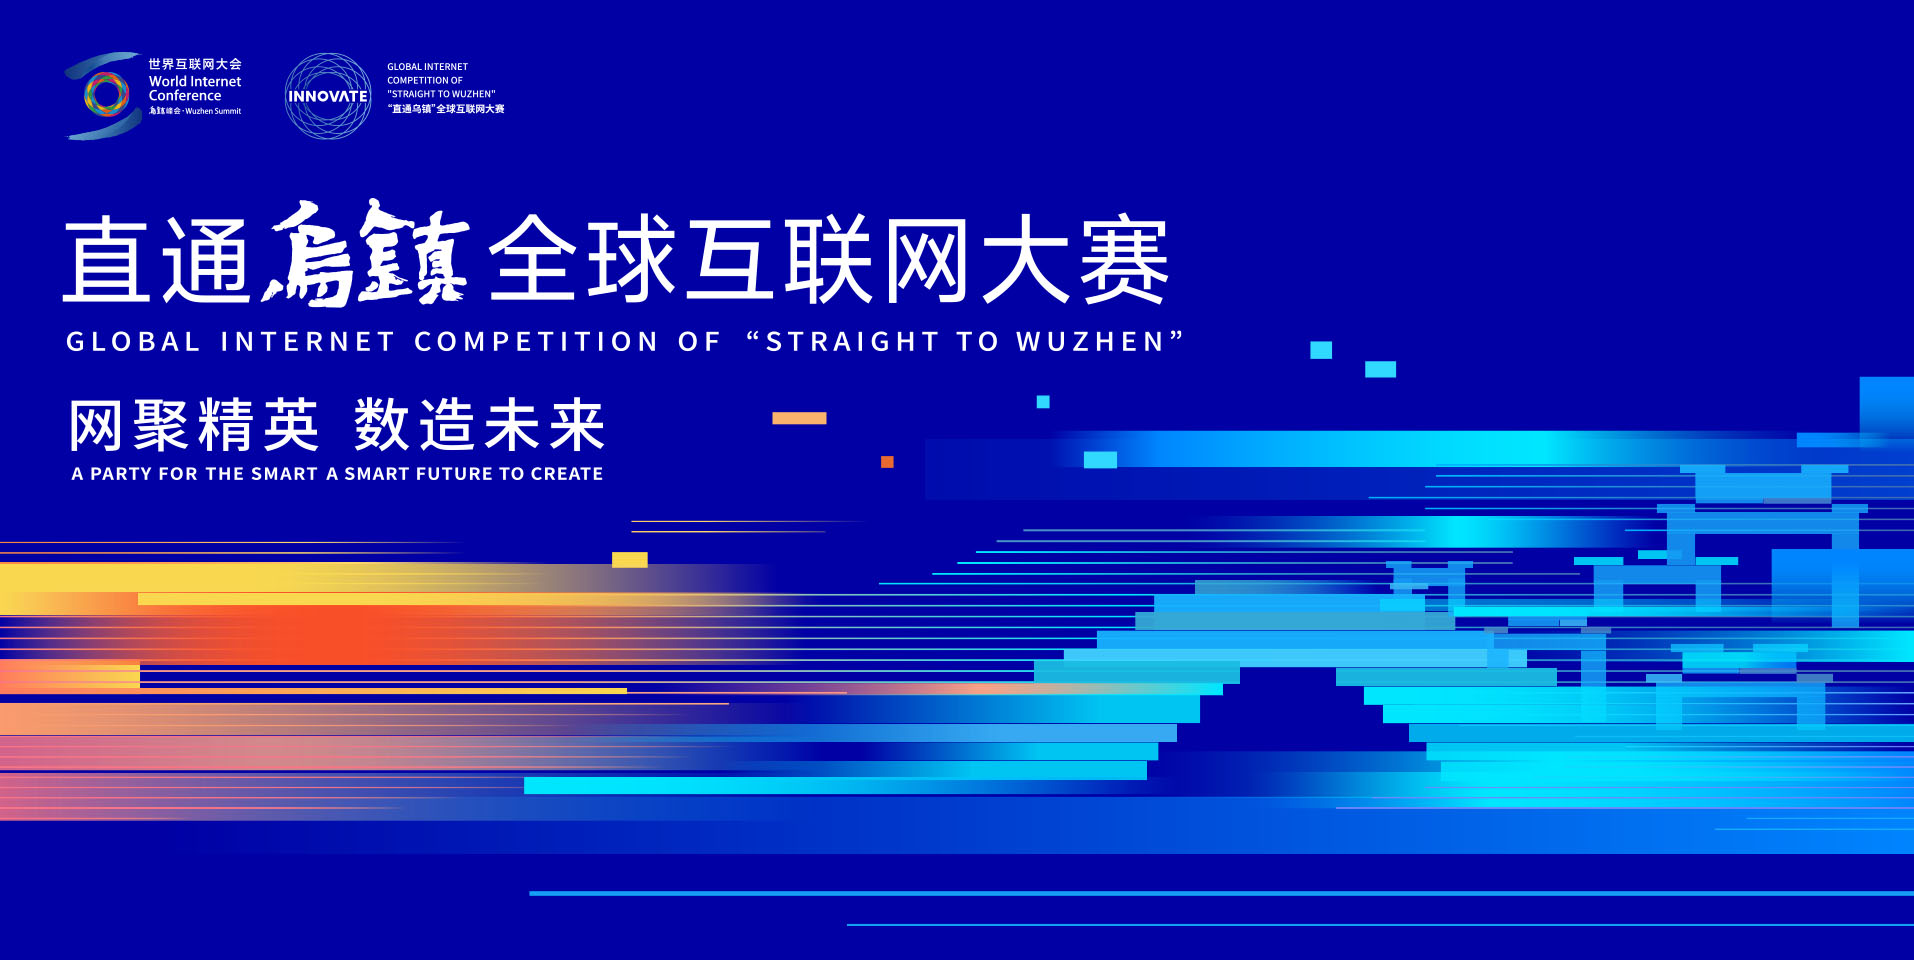 Straight to Wuzhen Competition